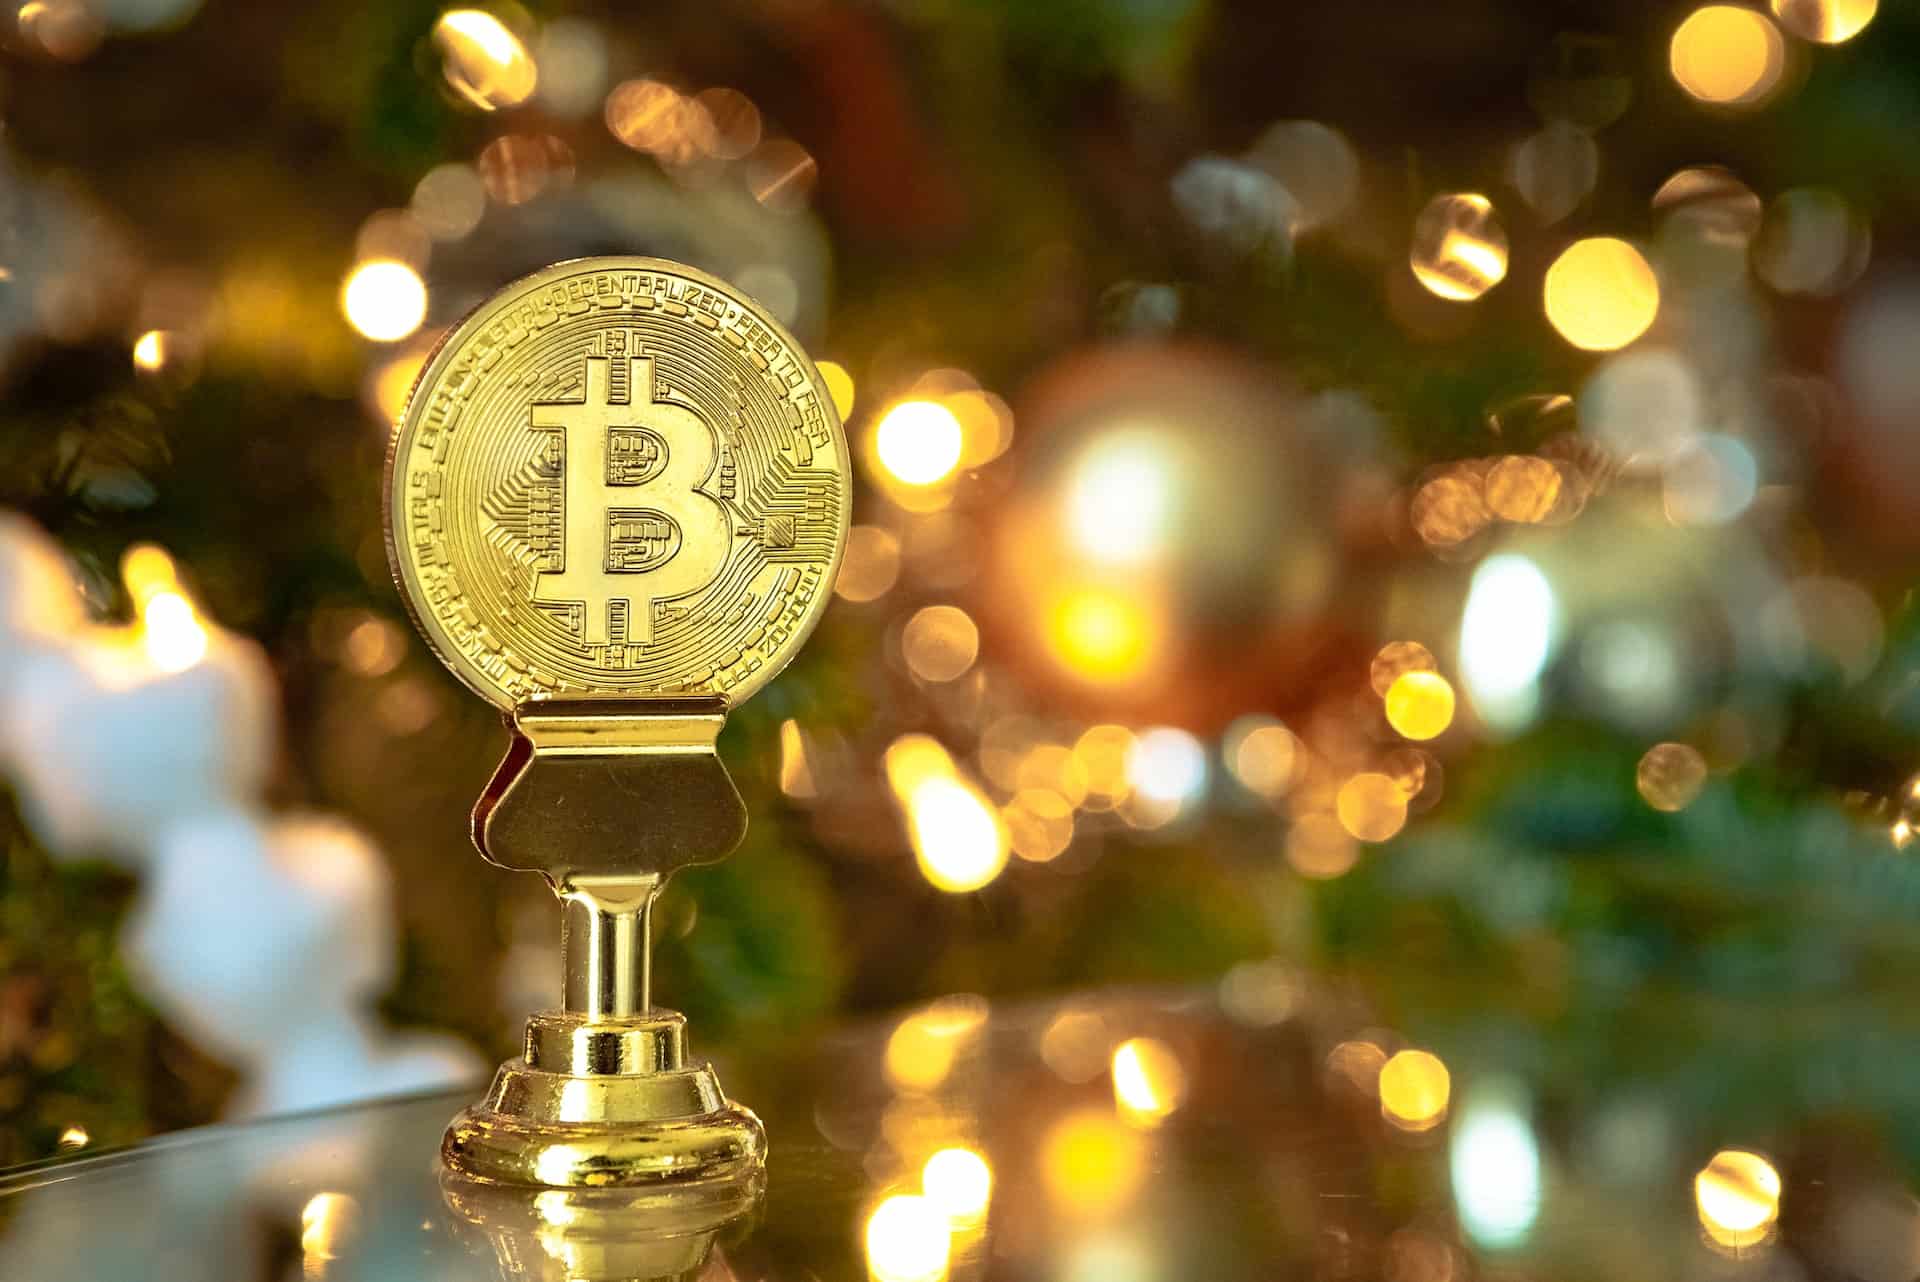 Bitcoin's Crowd Sentiment Have Turn Euphoric, Data Shows